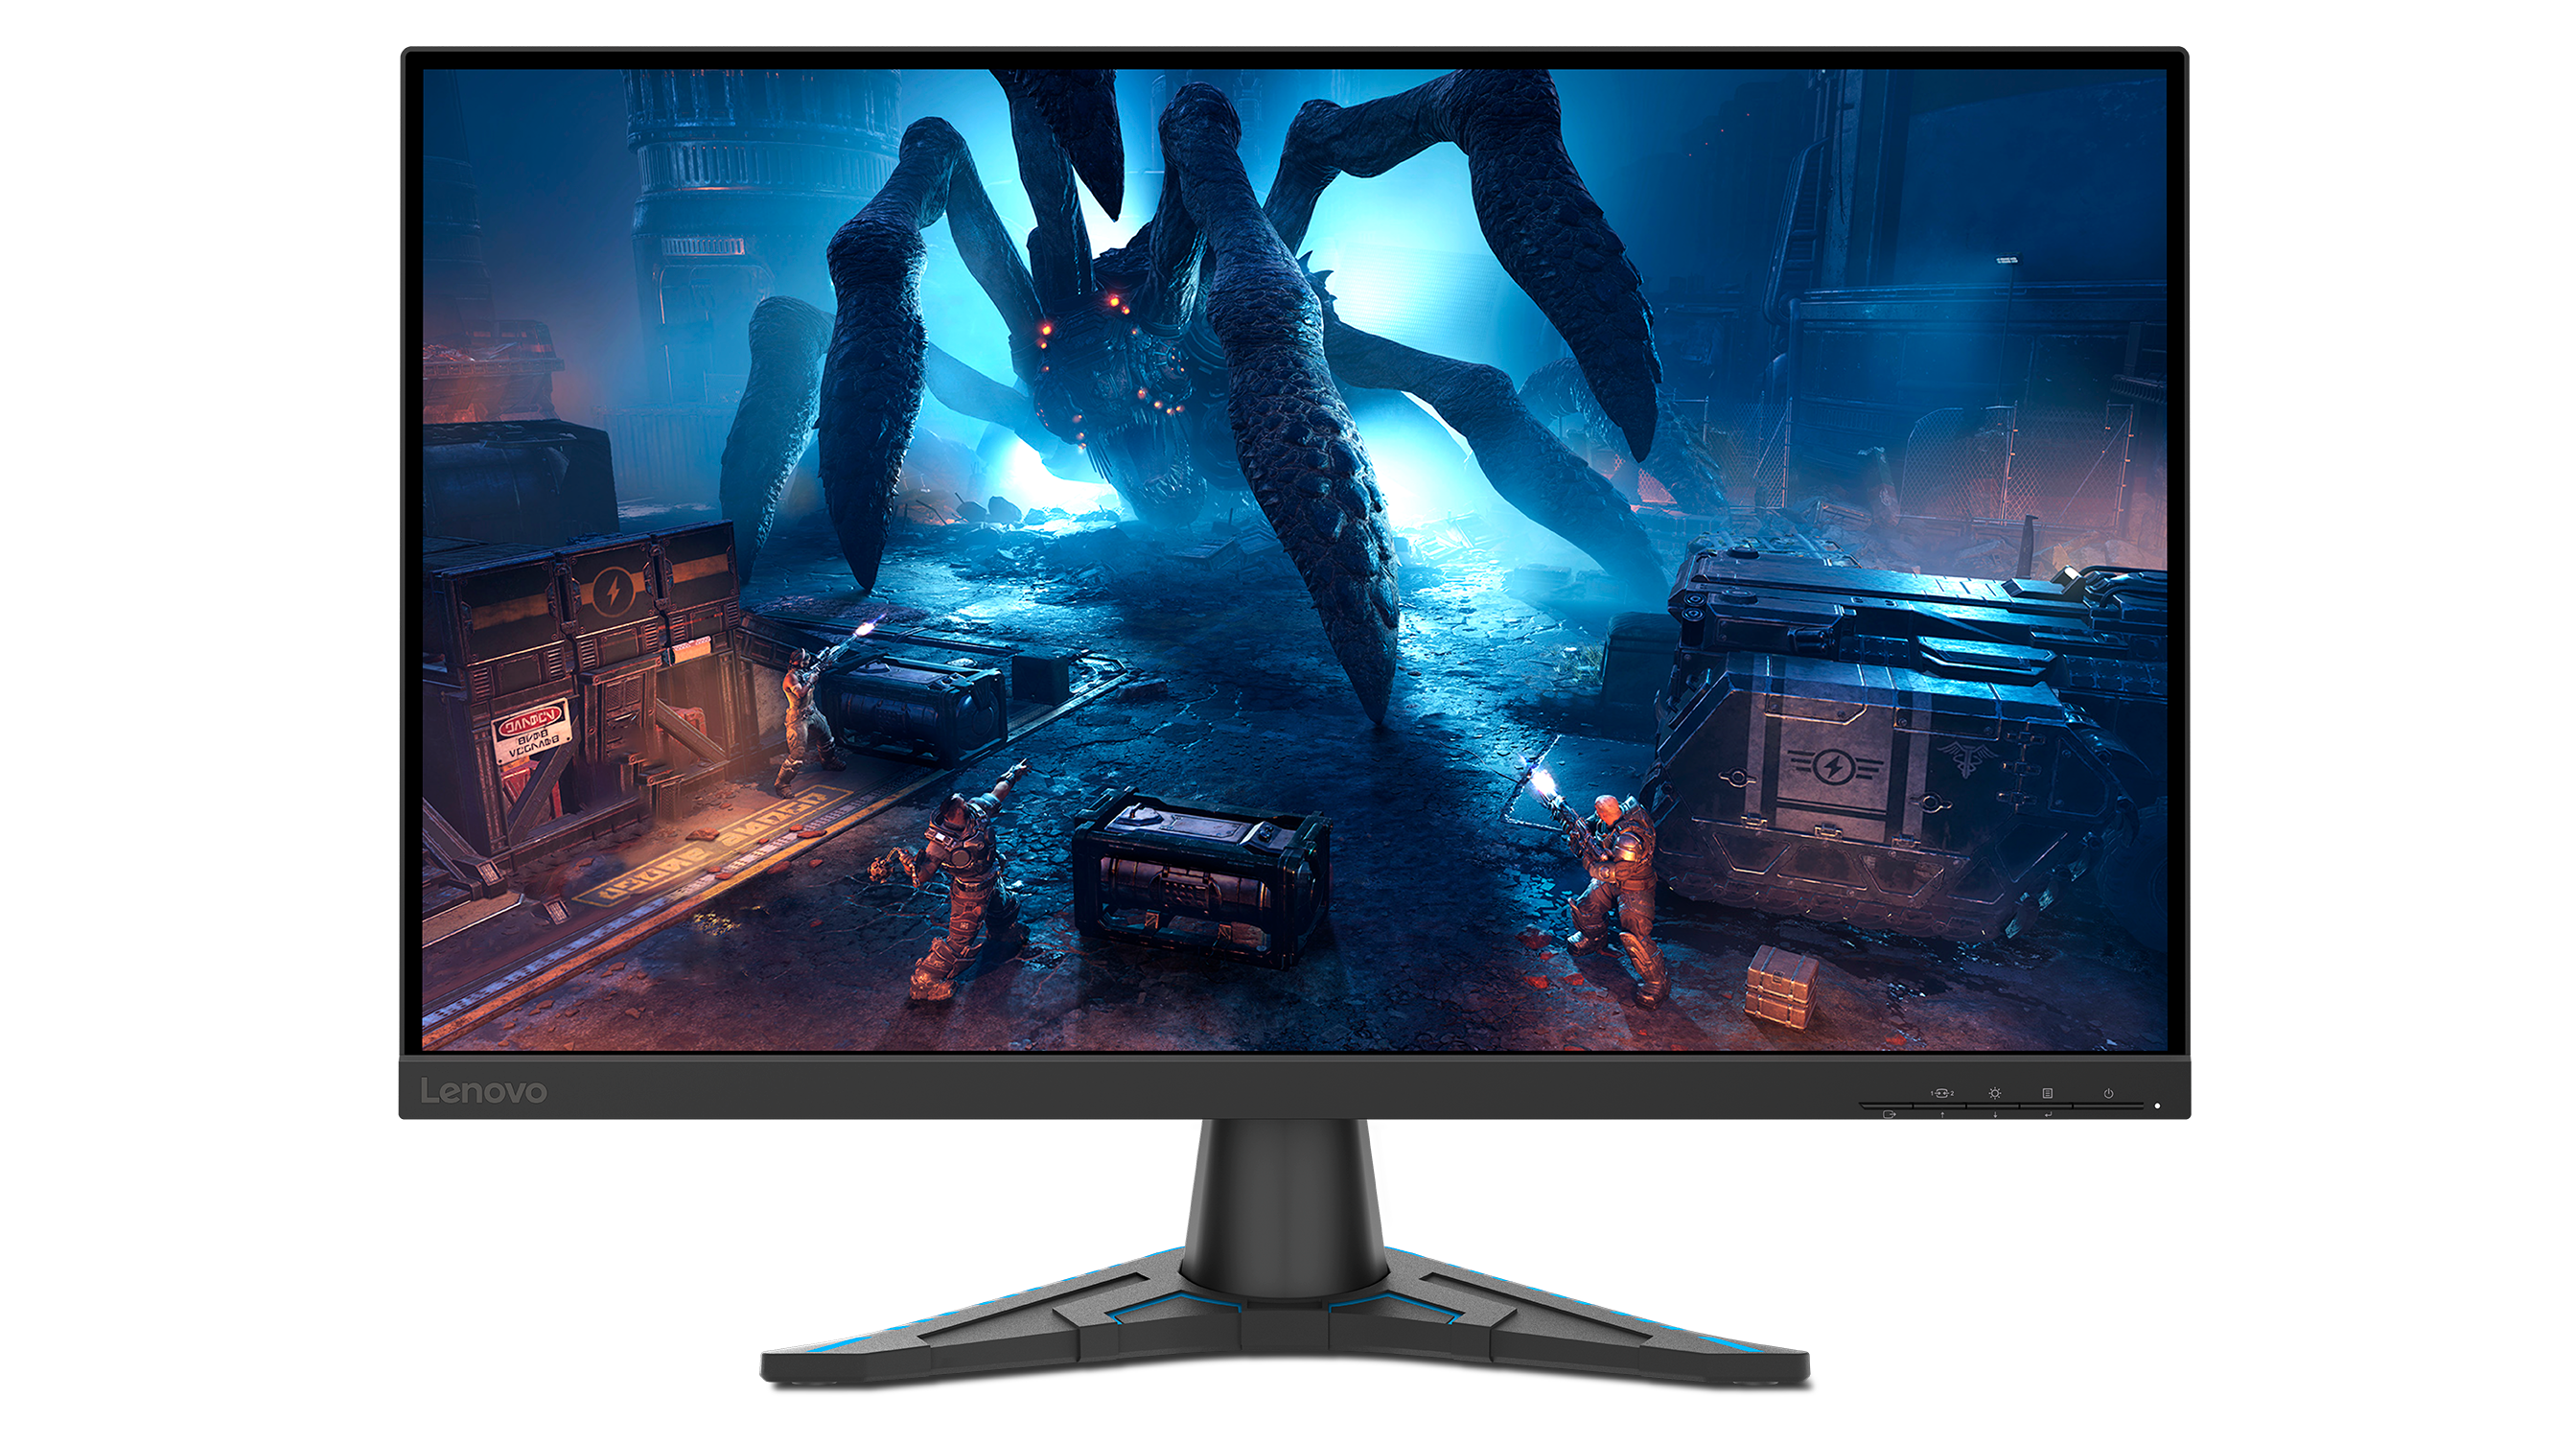 TCL UD 240 Hz R800 pegged to be the world's first 4K 240 Hz gaming monitor  -  News